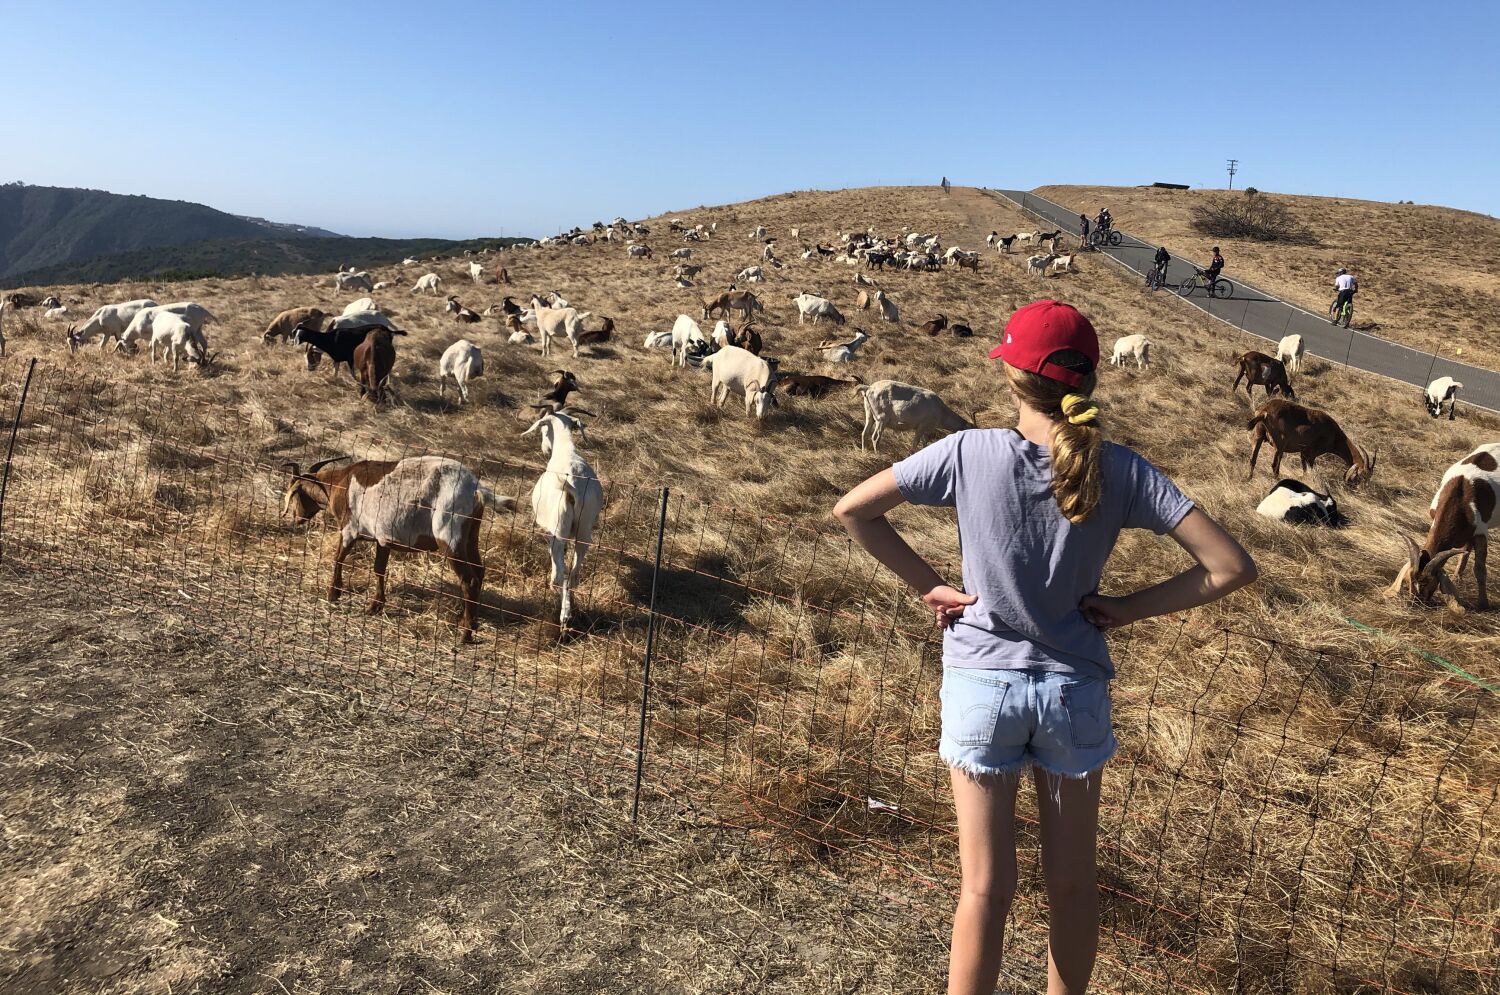 California goat herders’ salary rules leave the risk of